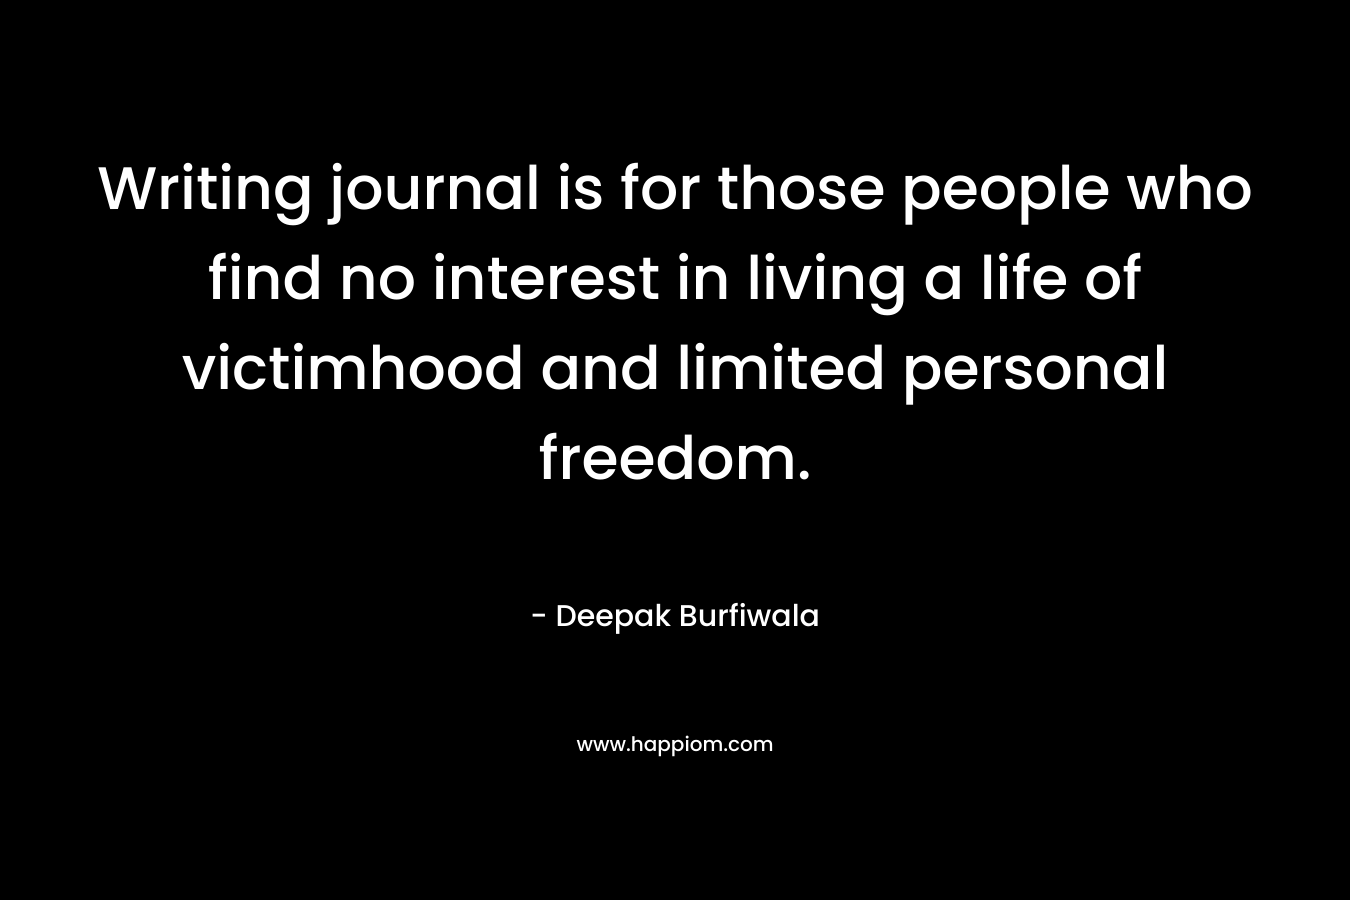 Writing journal is for those people who find no interest in living a life of victimhood and limited personal freedom. – Deepak Burfiwala